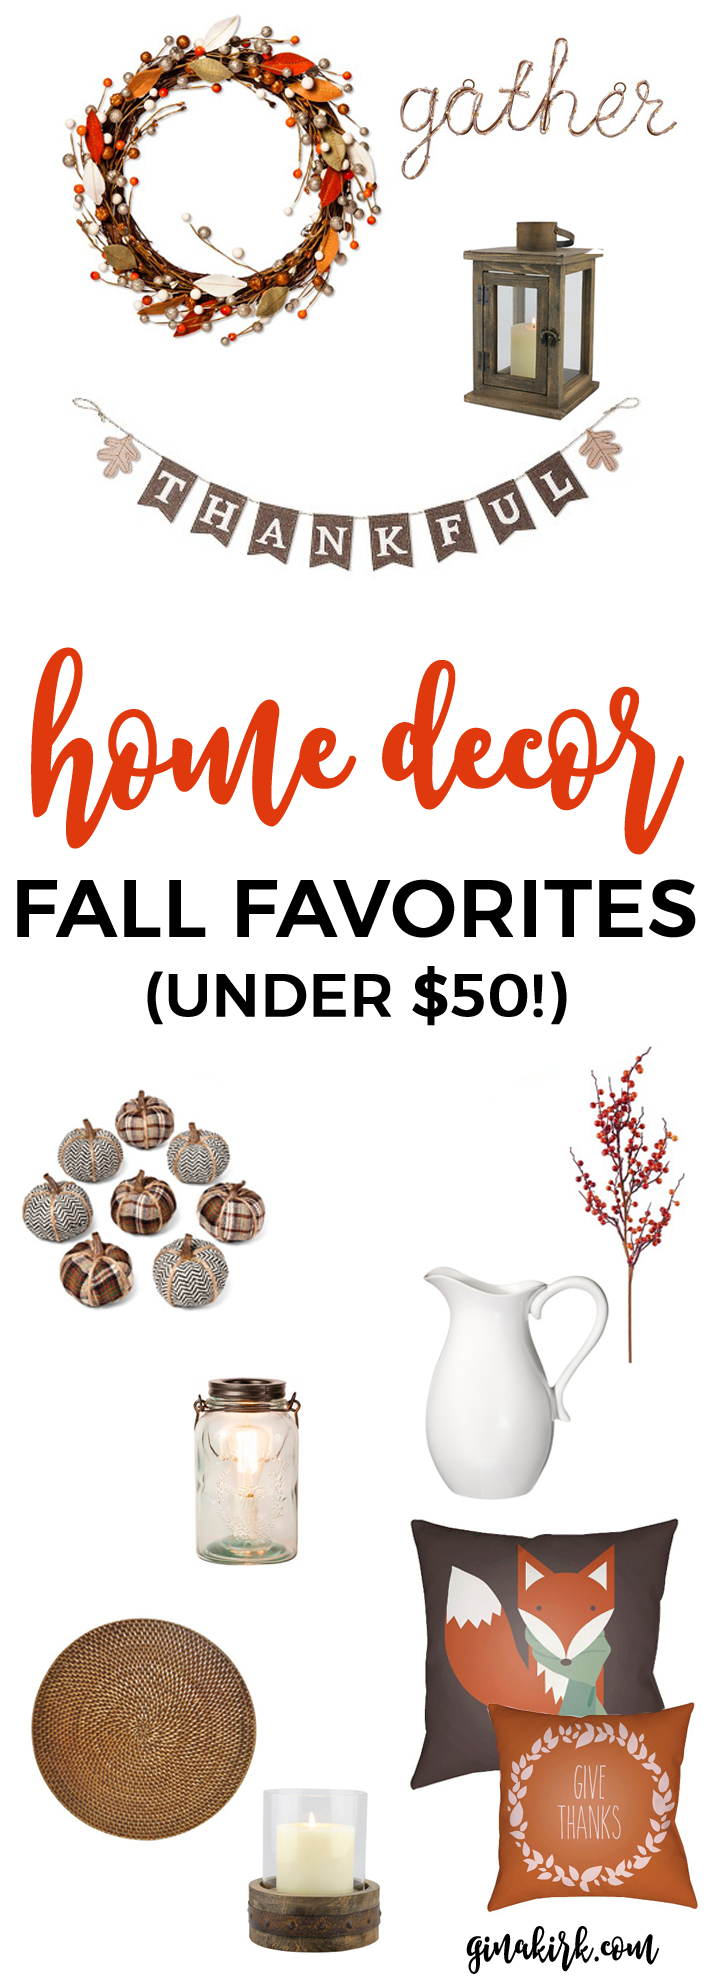 Cozy up with these fall favorite for the home! Home decor fall favorites | Gather and be thankful, home decor fall favorites under $50 (all from Target!) GinaKirk.com @ginaekirk